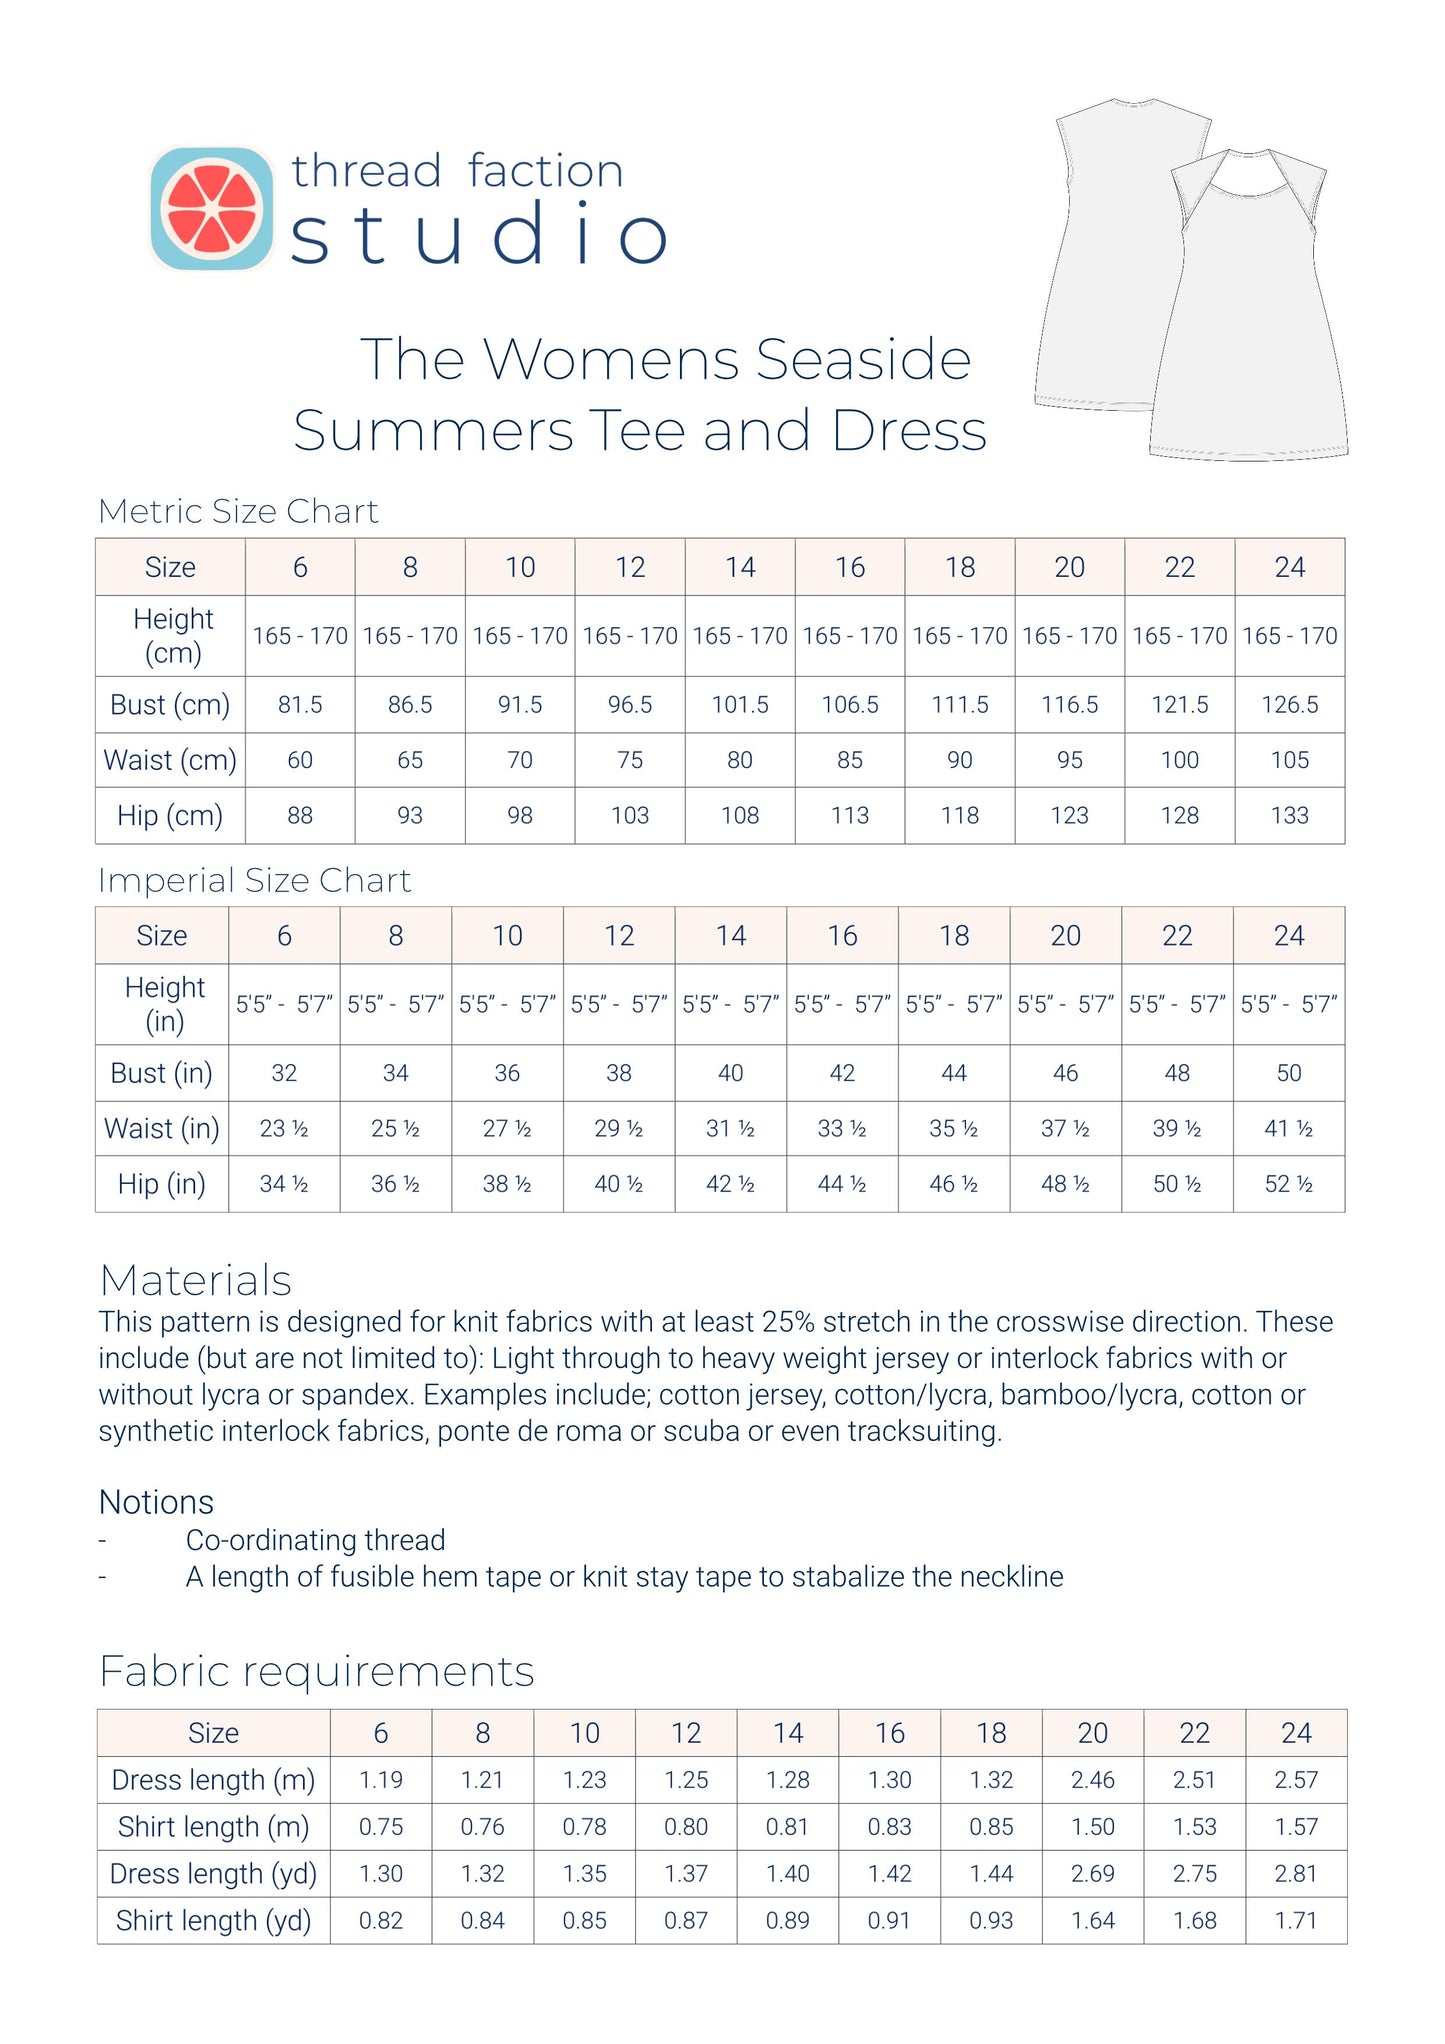 The Women's Seaside Summers Tee and Dress